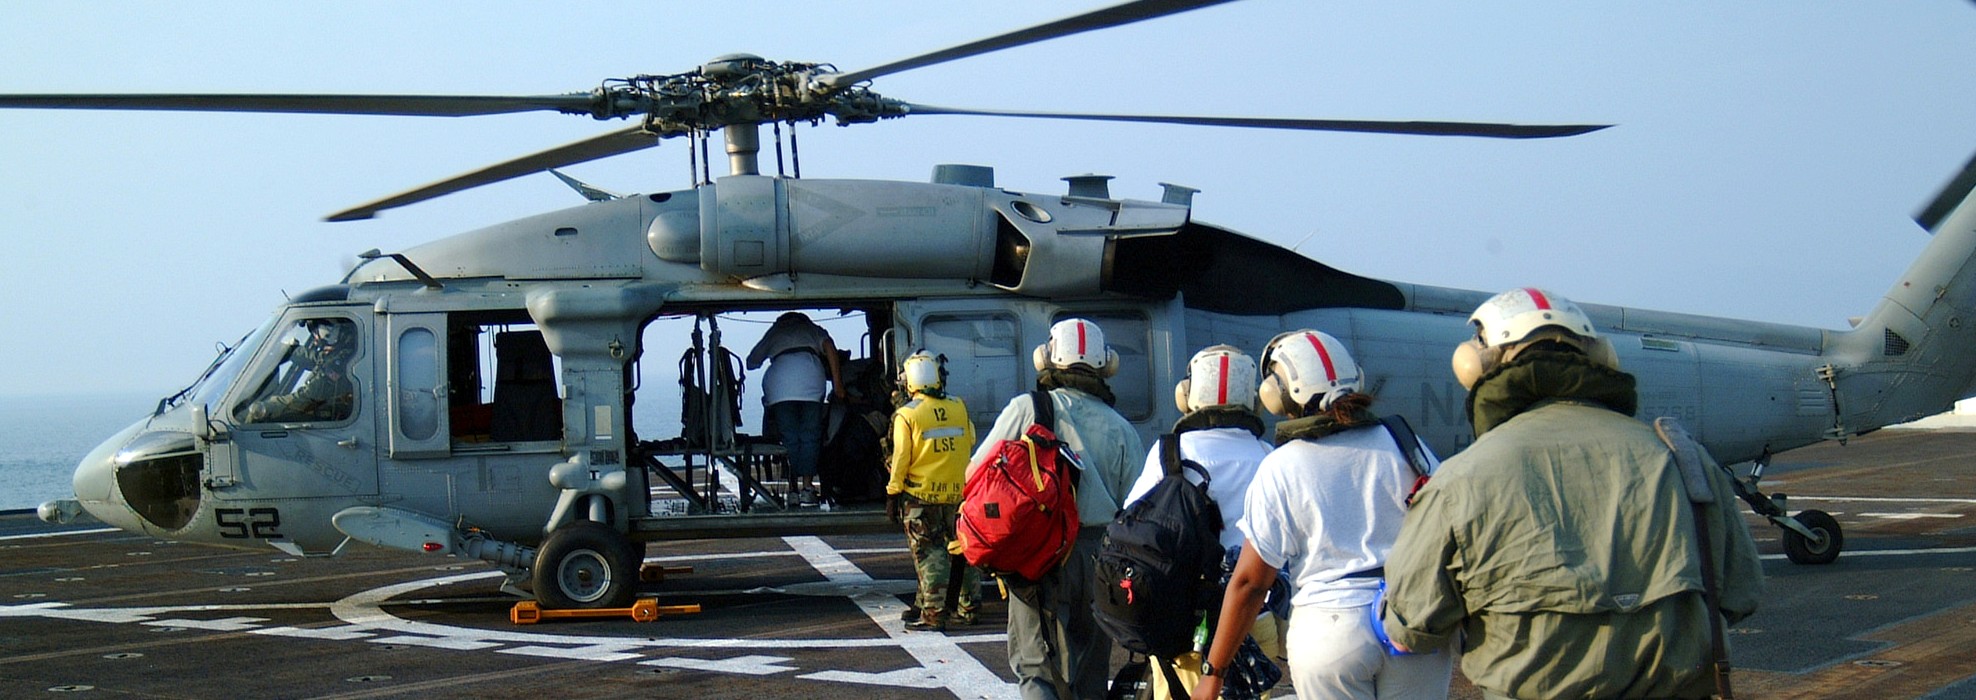 hc-5 providers helicopter combat support squadron navy mh-60s seahawk 08